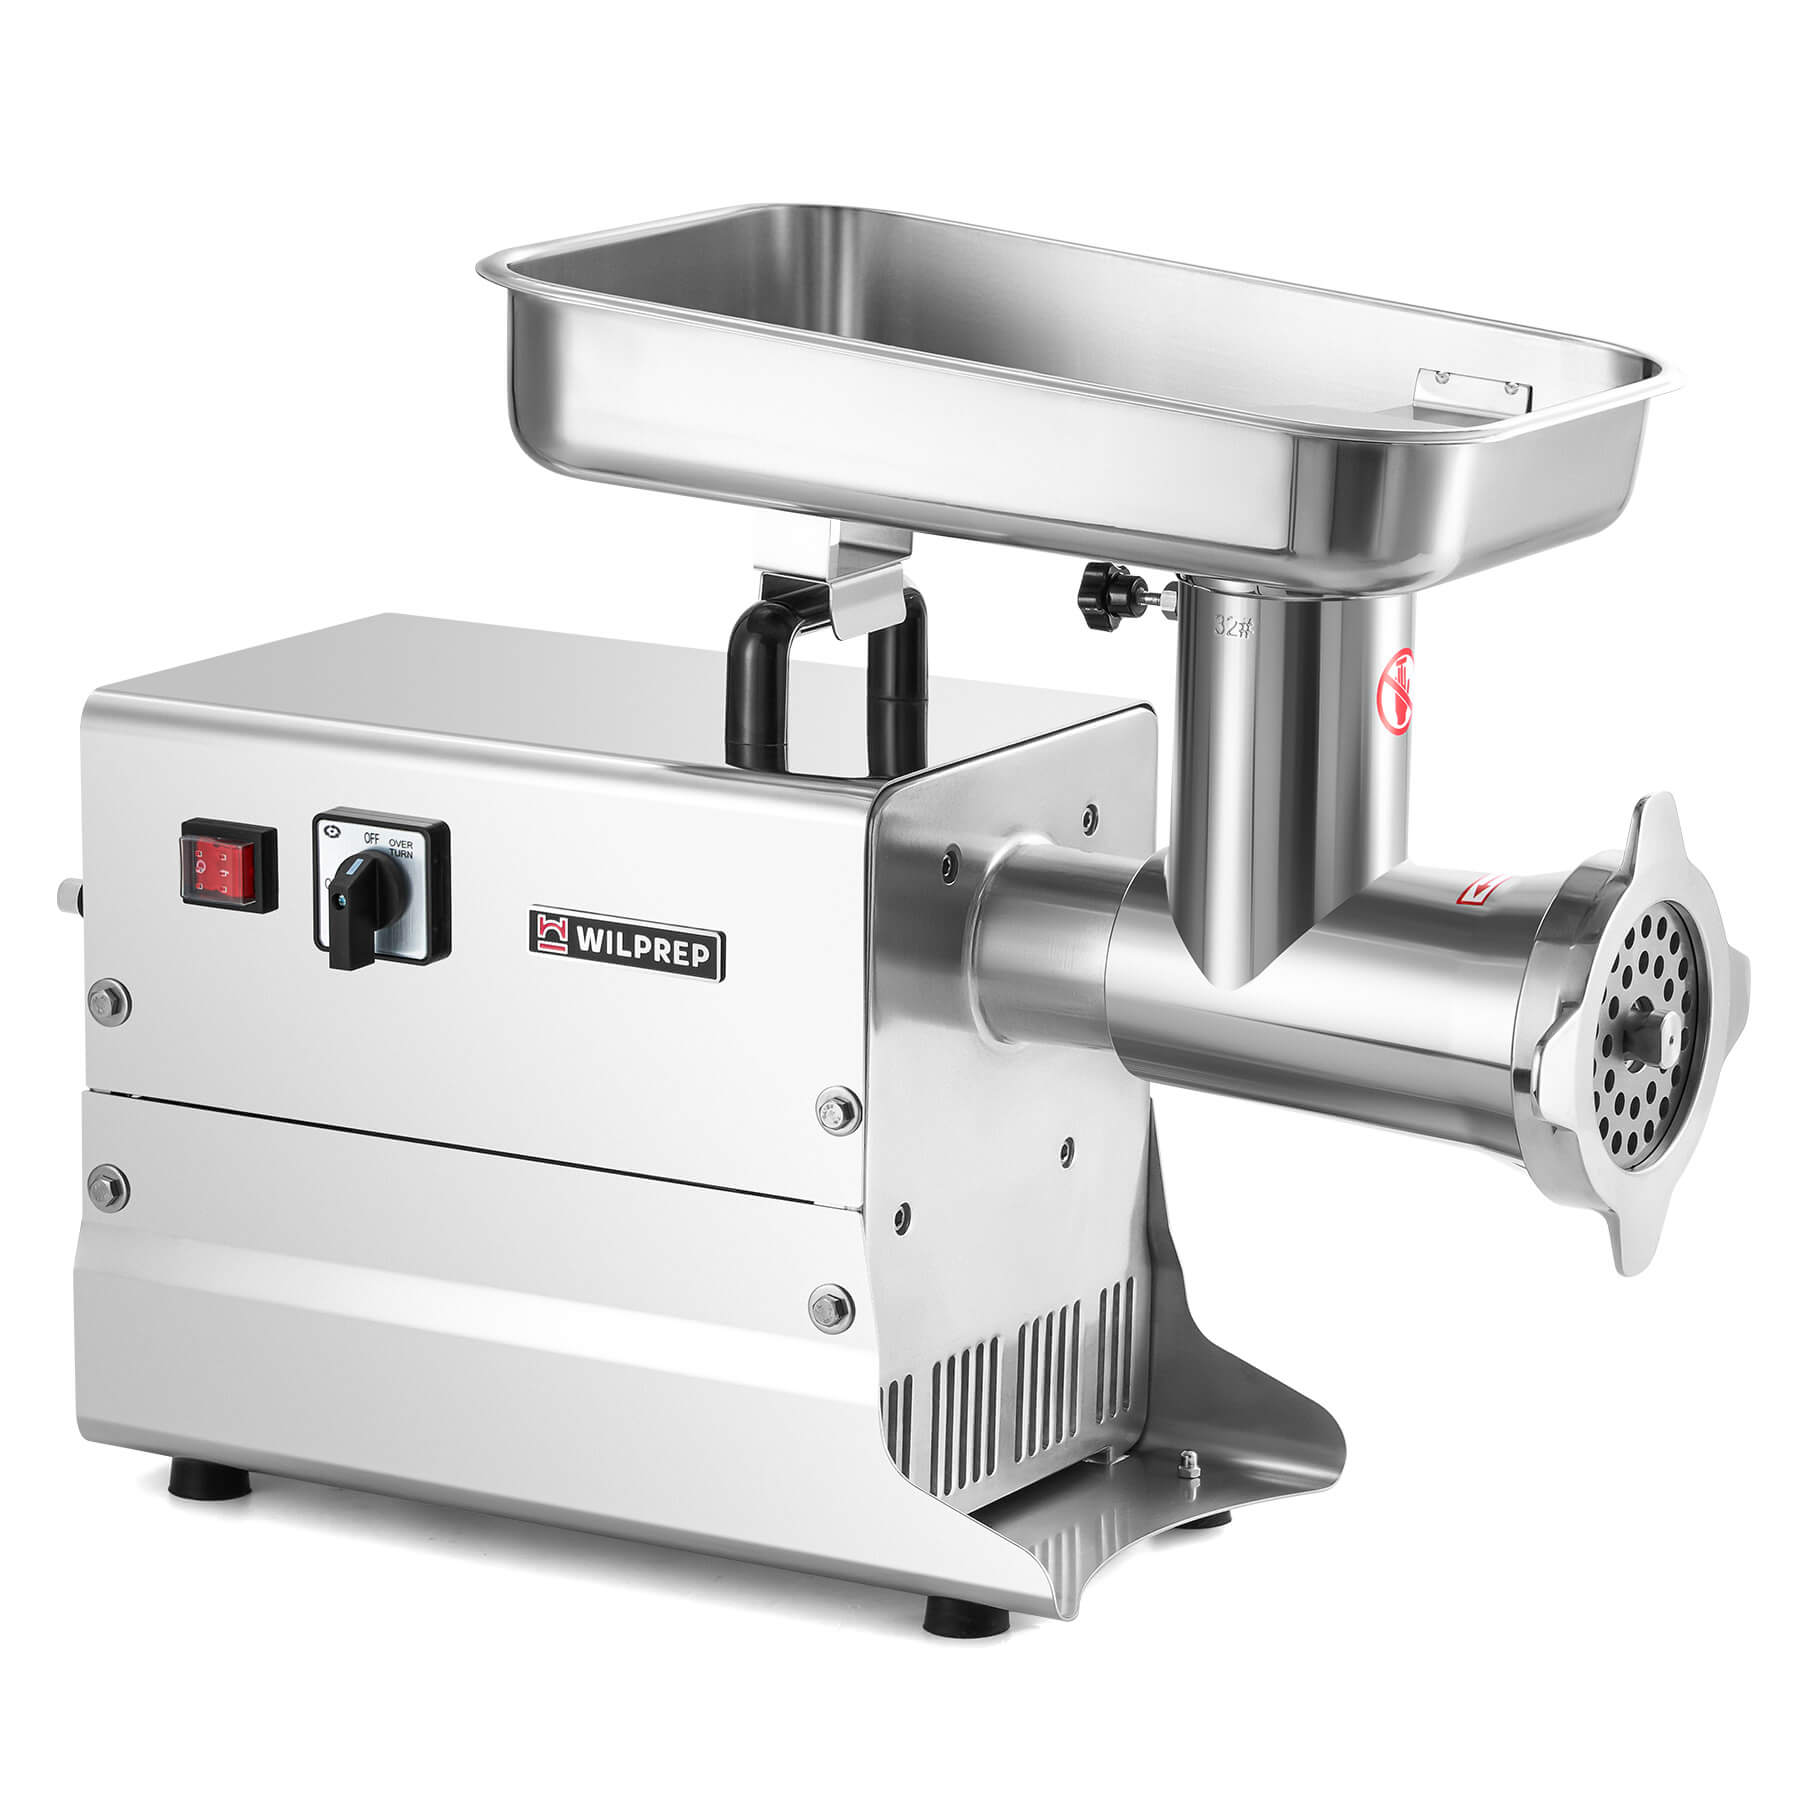 1500W Electric Meat Grinder with Reverse Function ETL Approved-110V,2hp